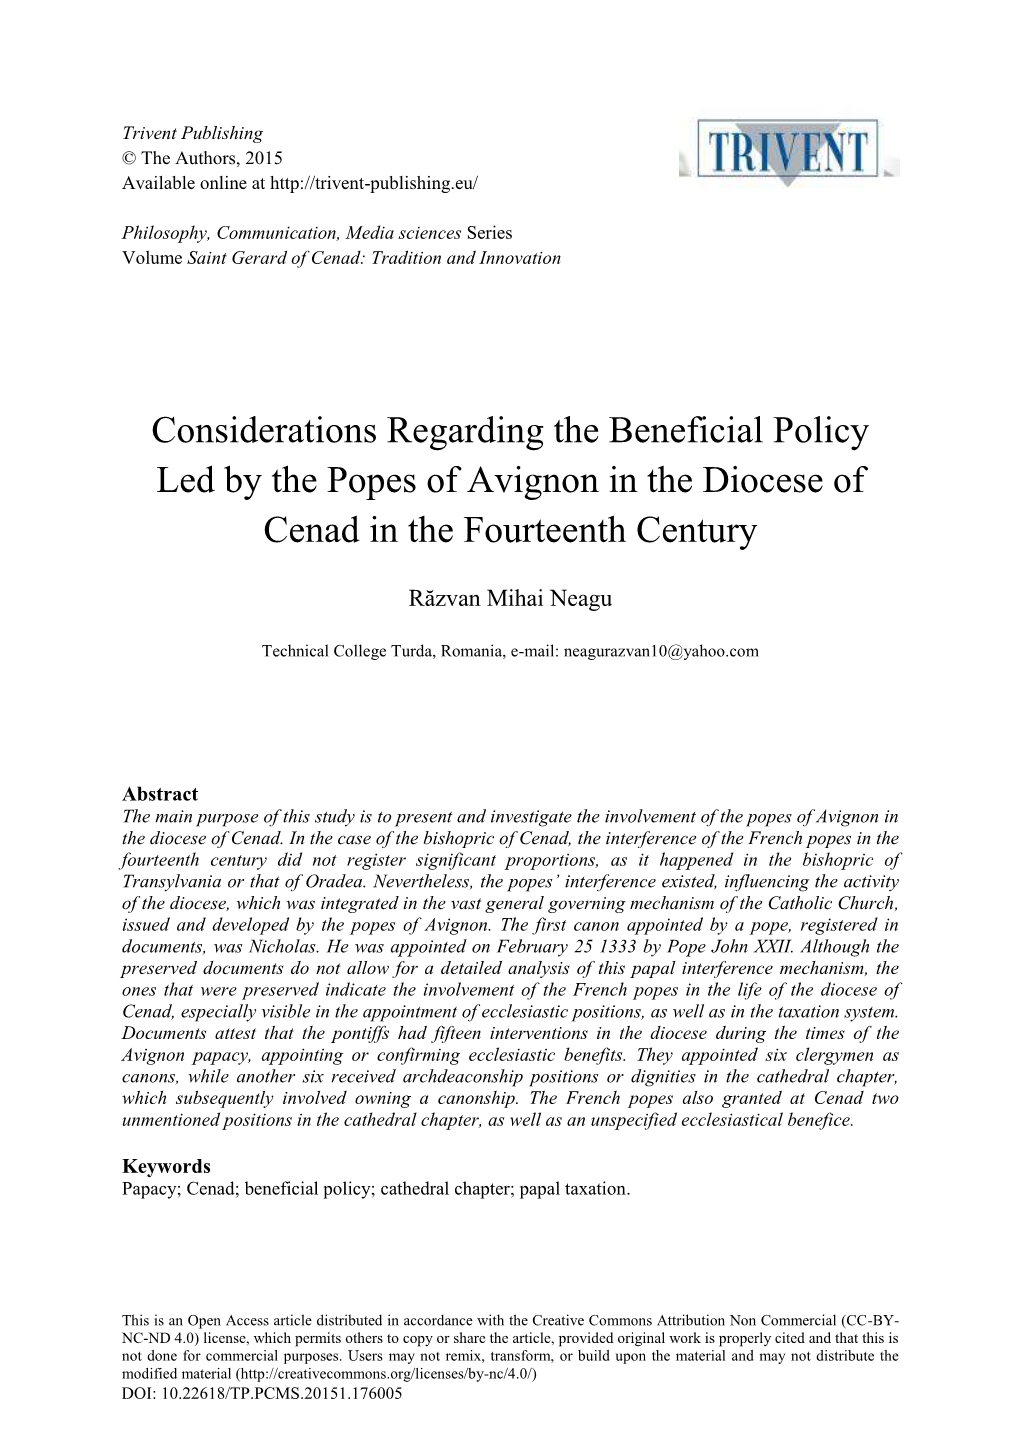 Considerations Regarding the Beneficial Policy Led by the Popes of Avignon in the Diocese of Cenad in the Fourteenth Century